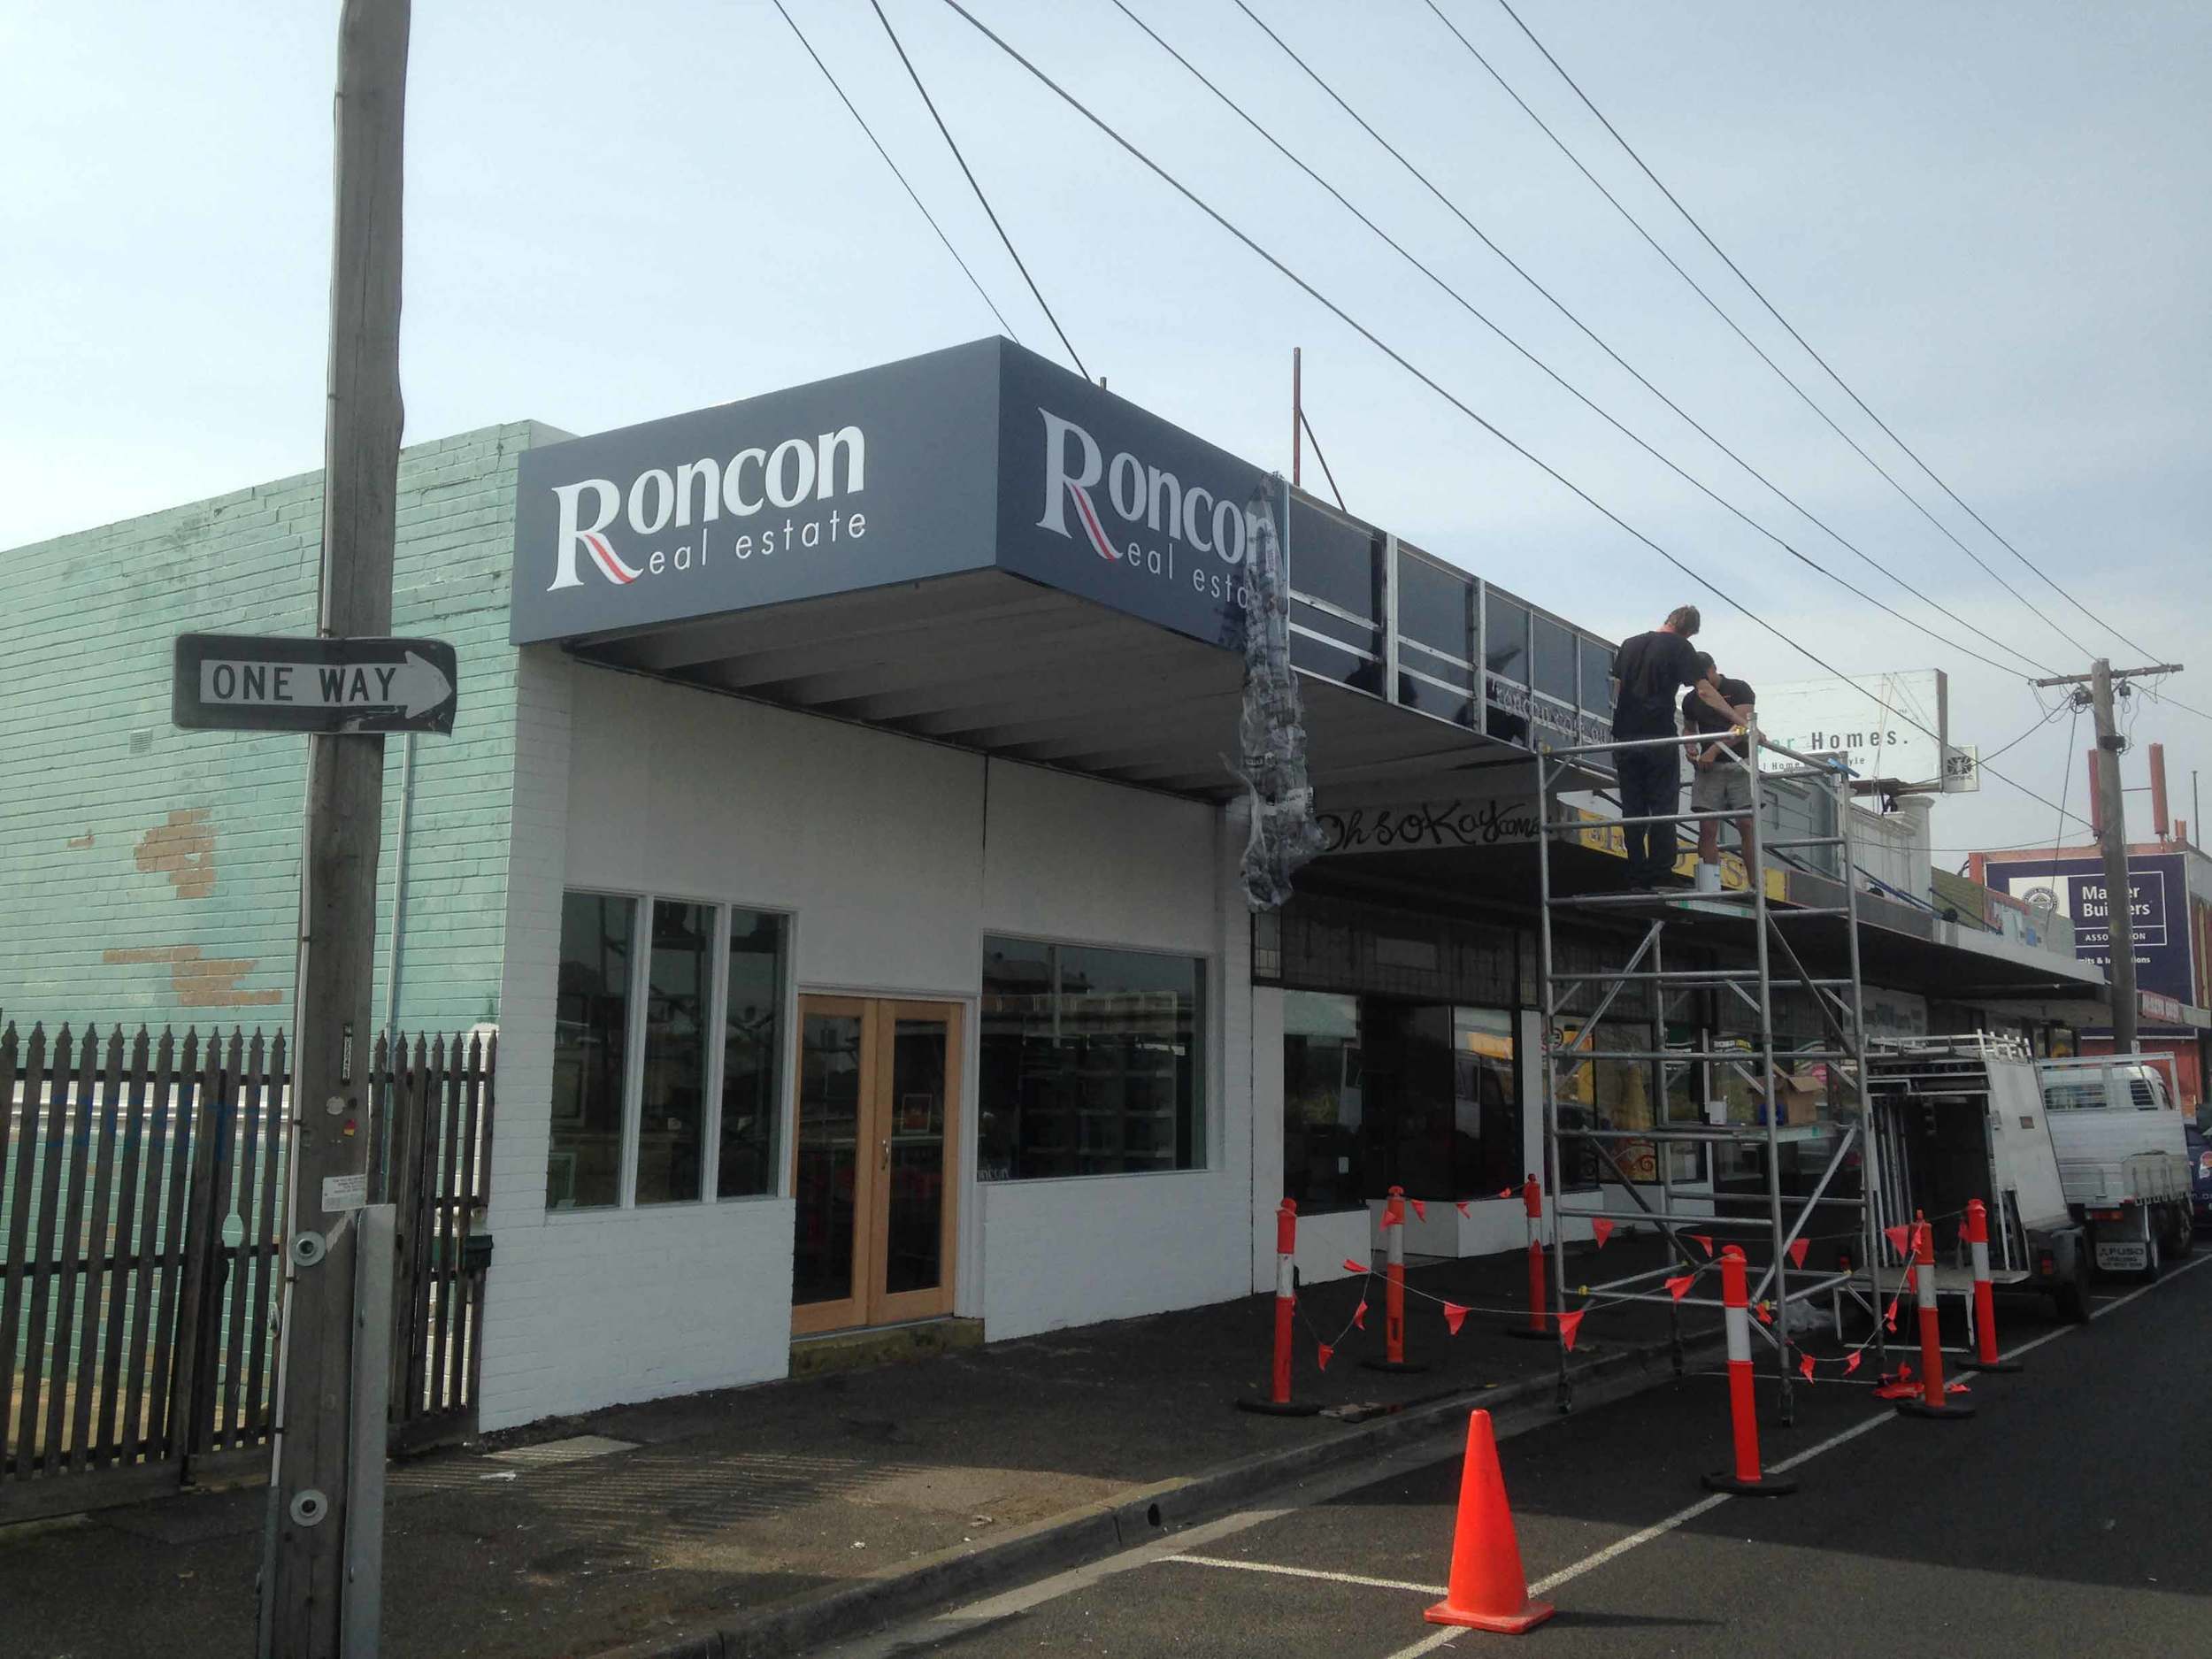 Roncon-Real-Estate-Corporate-Signs-Geelong.jpg